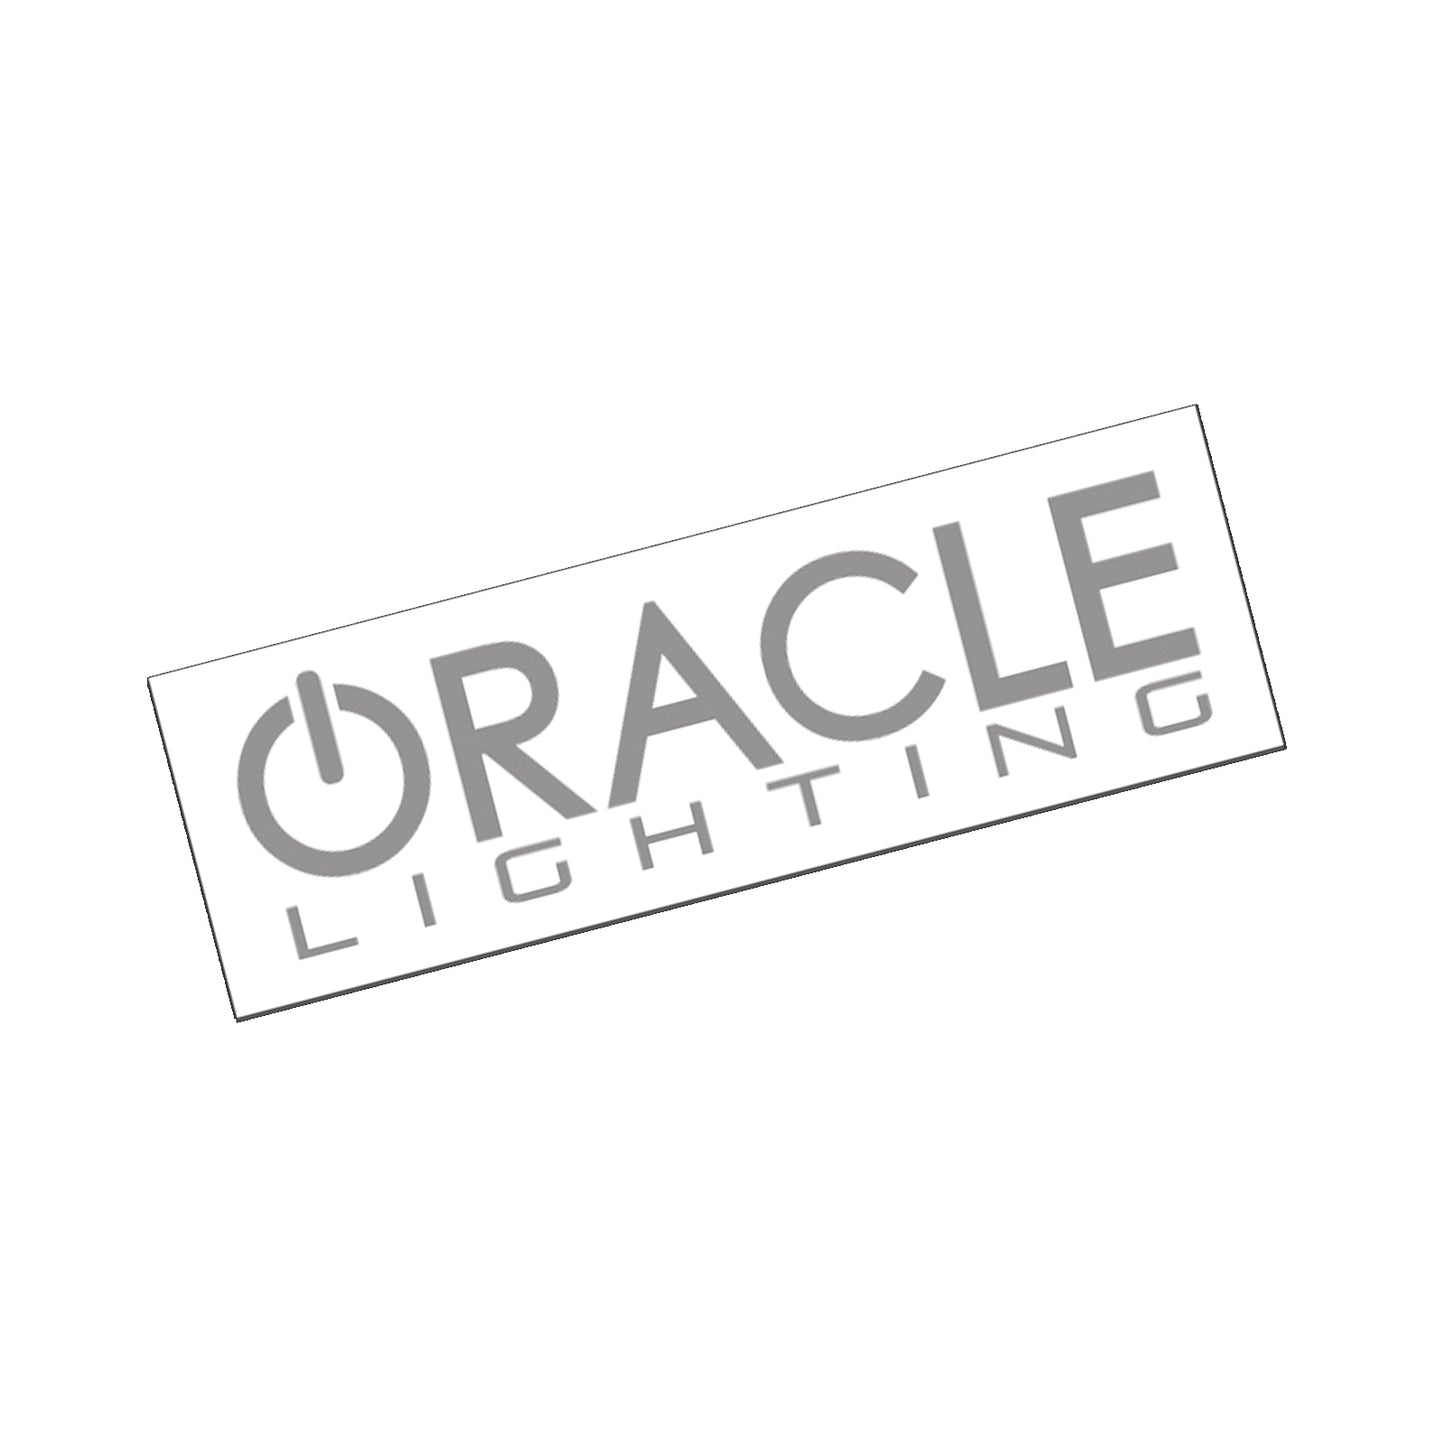 Oracle Lighting 8069-504 - ORACLE Lighting Decal 12in. - Reflected Silver